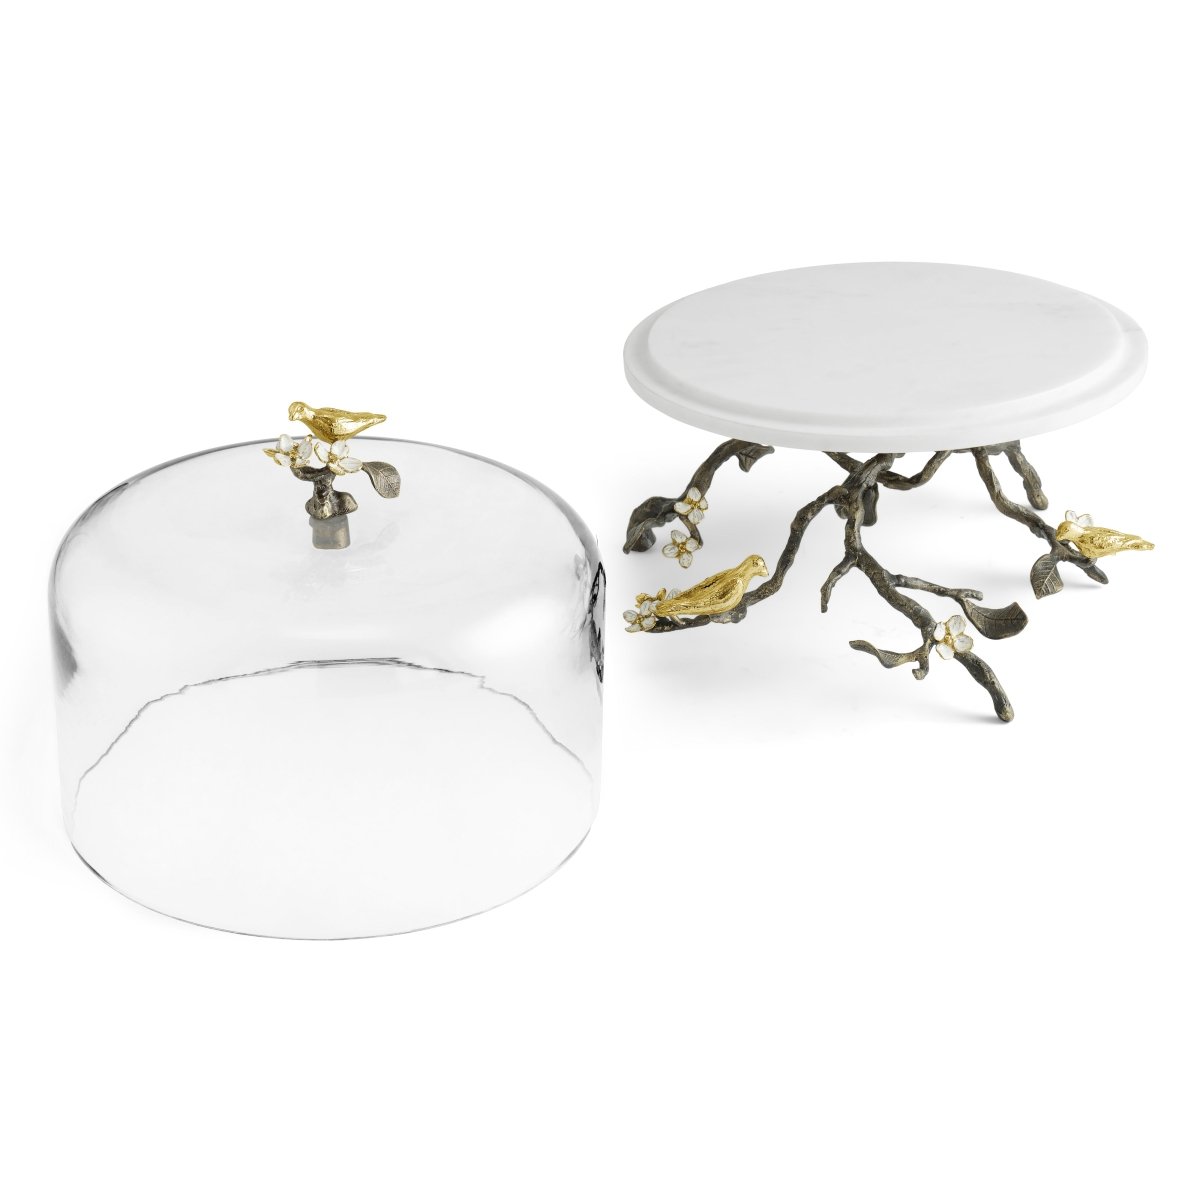 Michael Aram Lovebirds Cake Stand with Dome